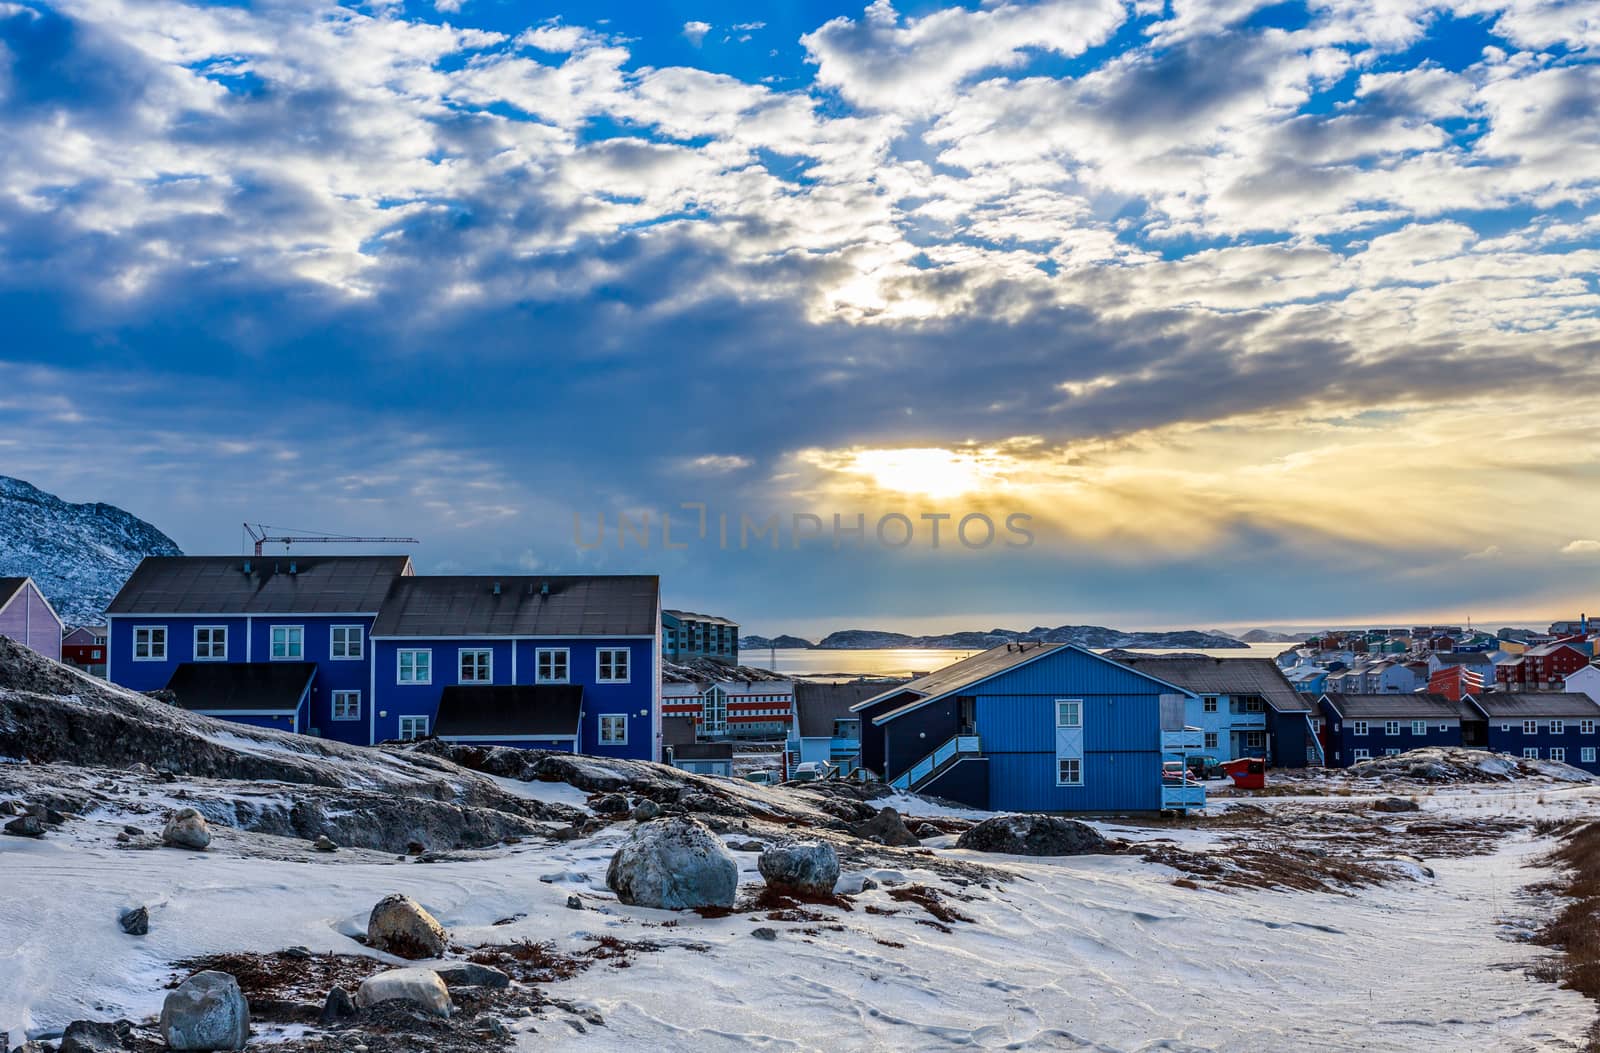 Polar sunset over Inuit houses on the rocky hills with snow, Nuu by ambeon